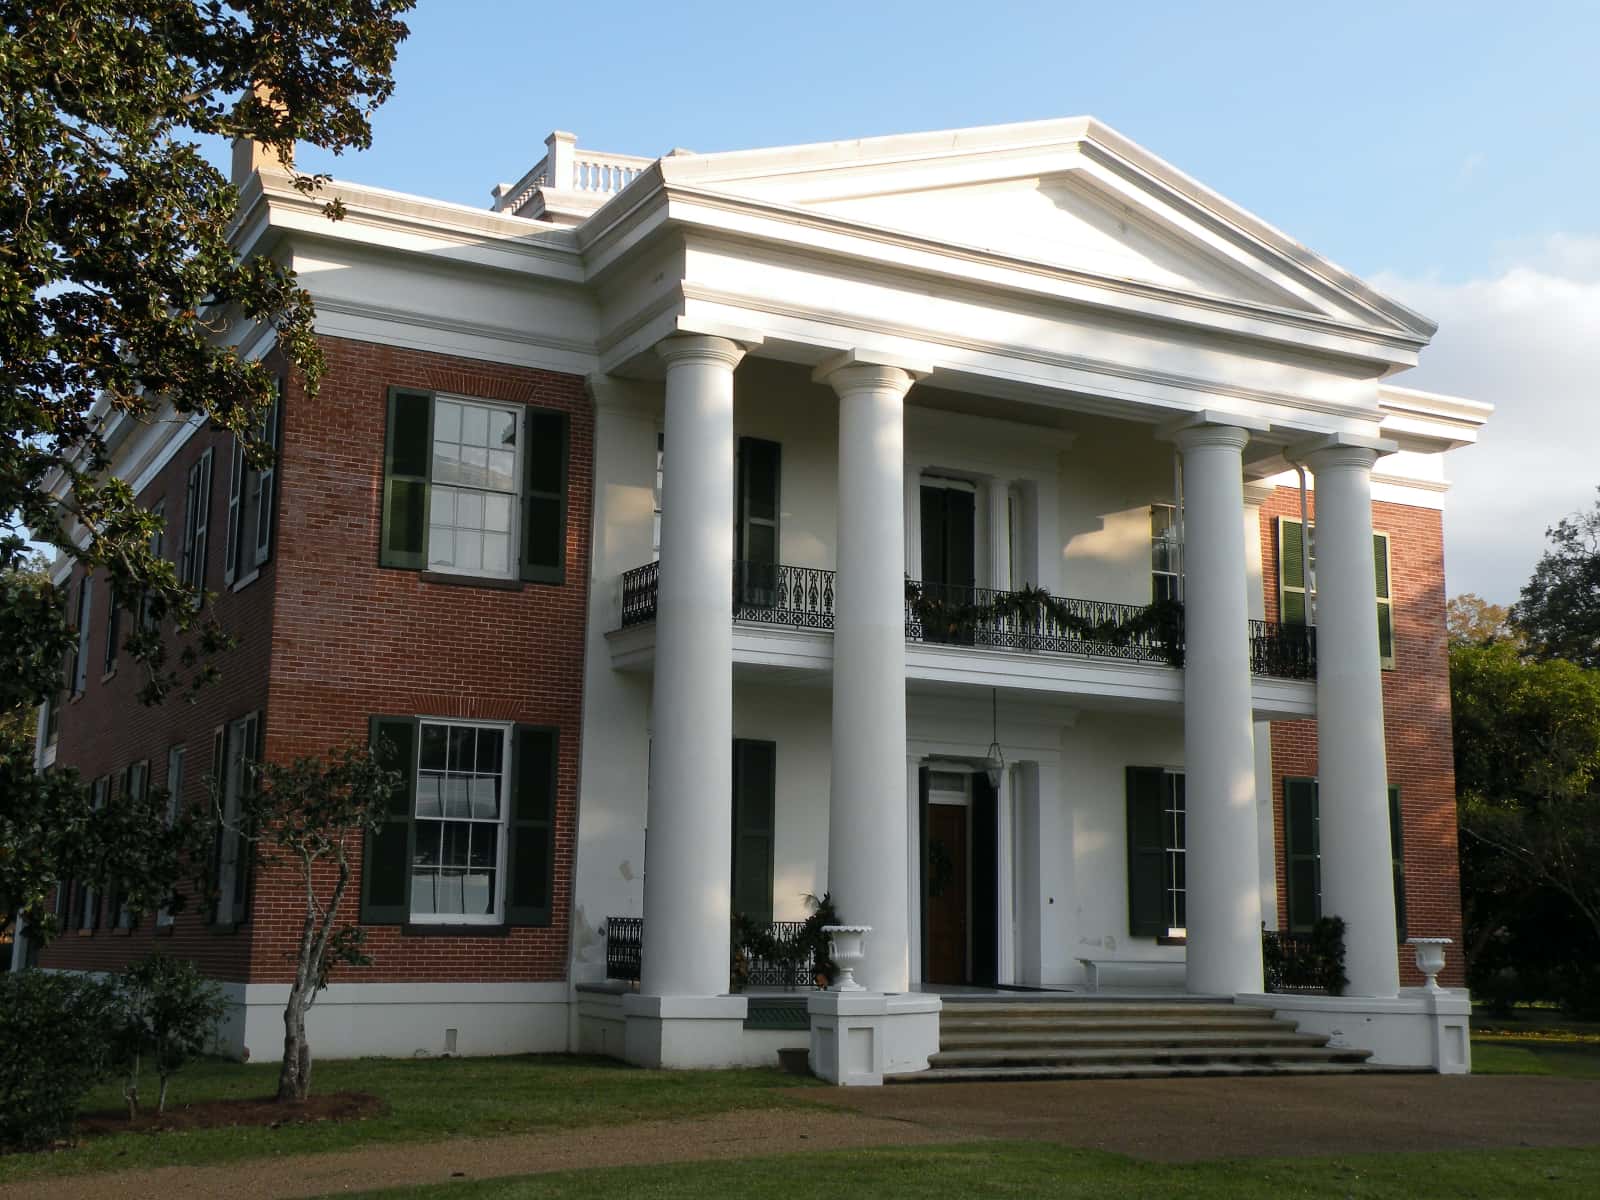 Front view of old red brick house with white columns